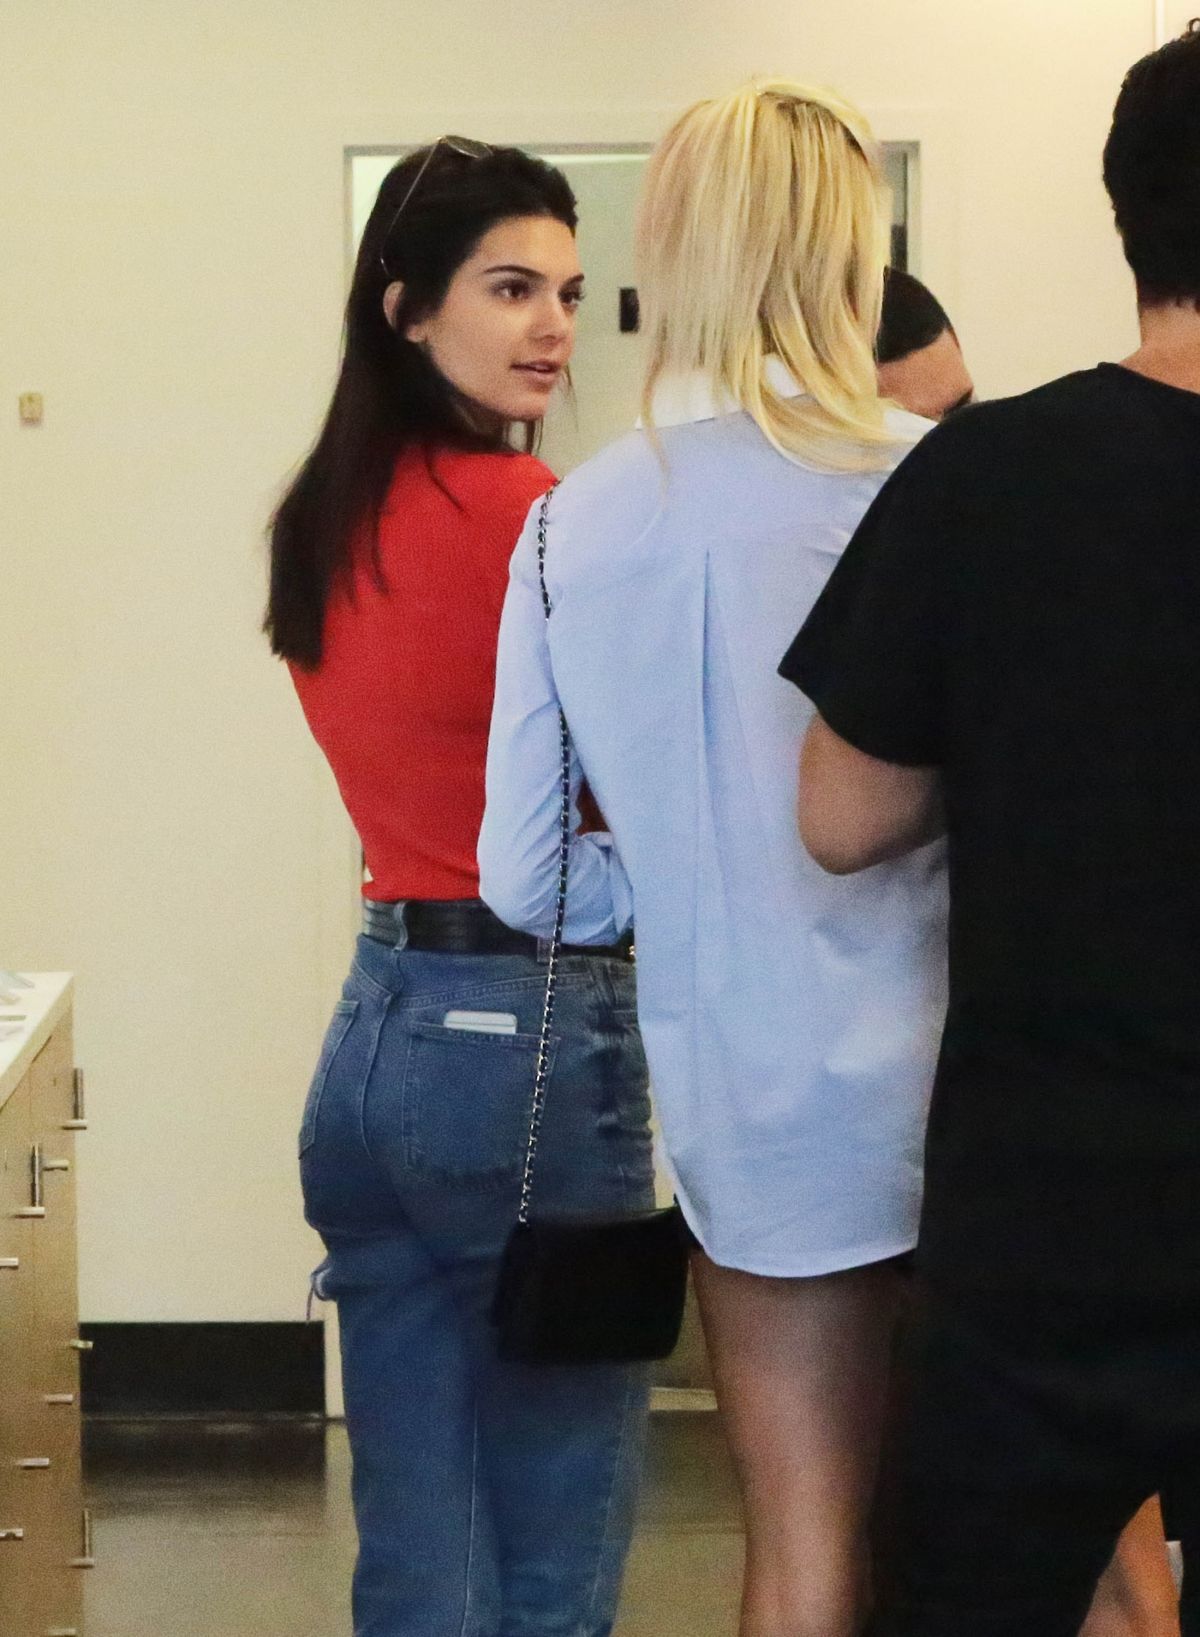 kendall-jenner-in-tight-jeans-out-in-new-york-09-02-2015_13.jpg